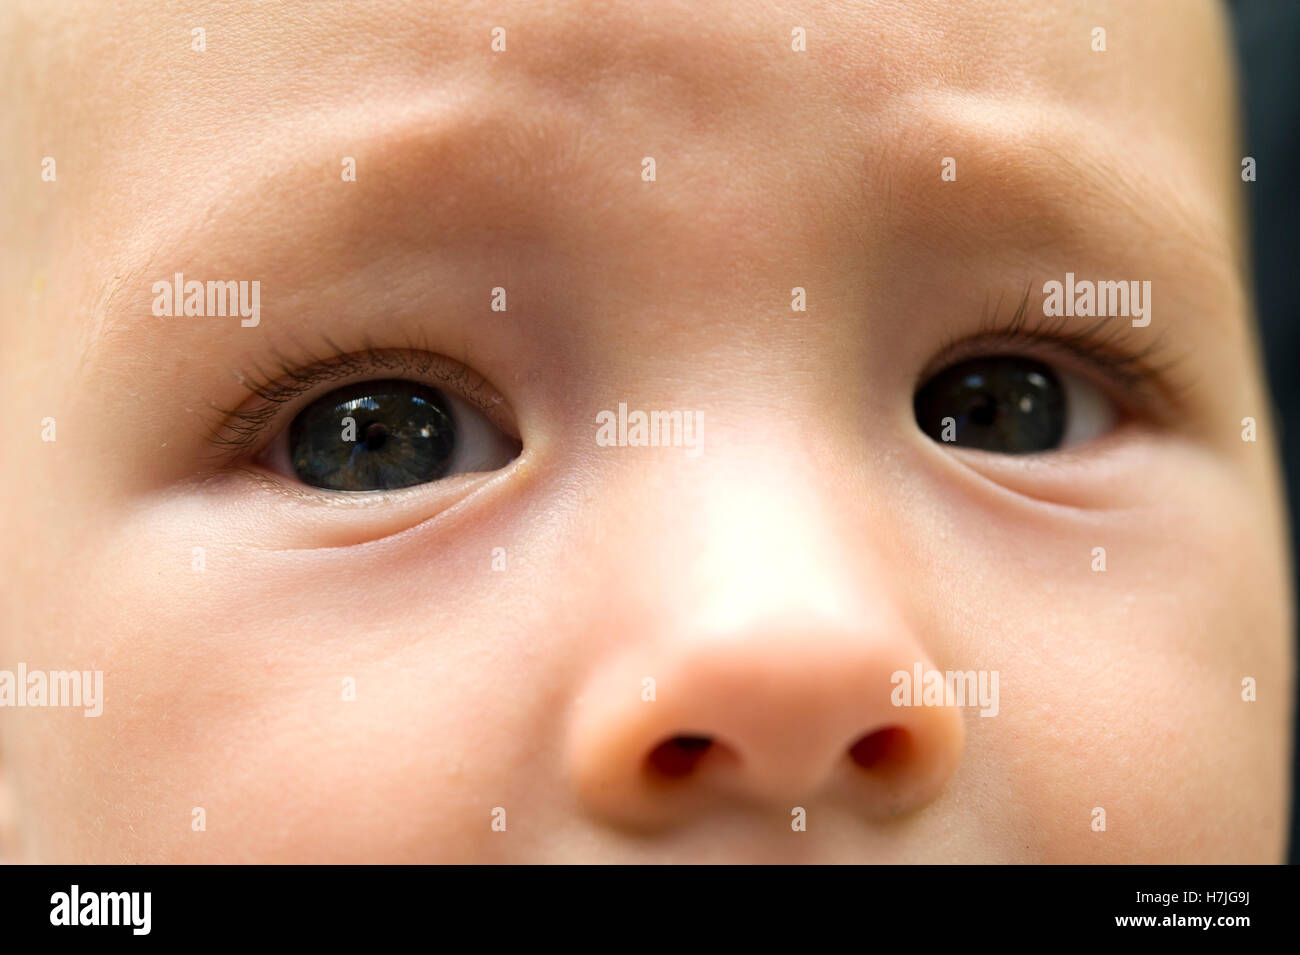 Eyes of a 6-months old baby Stock Photo